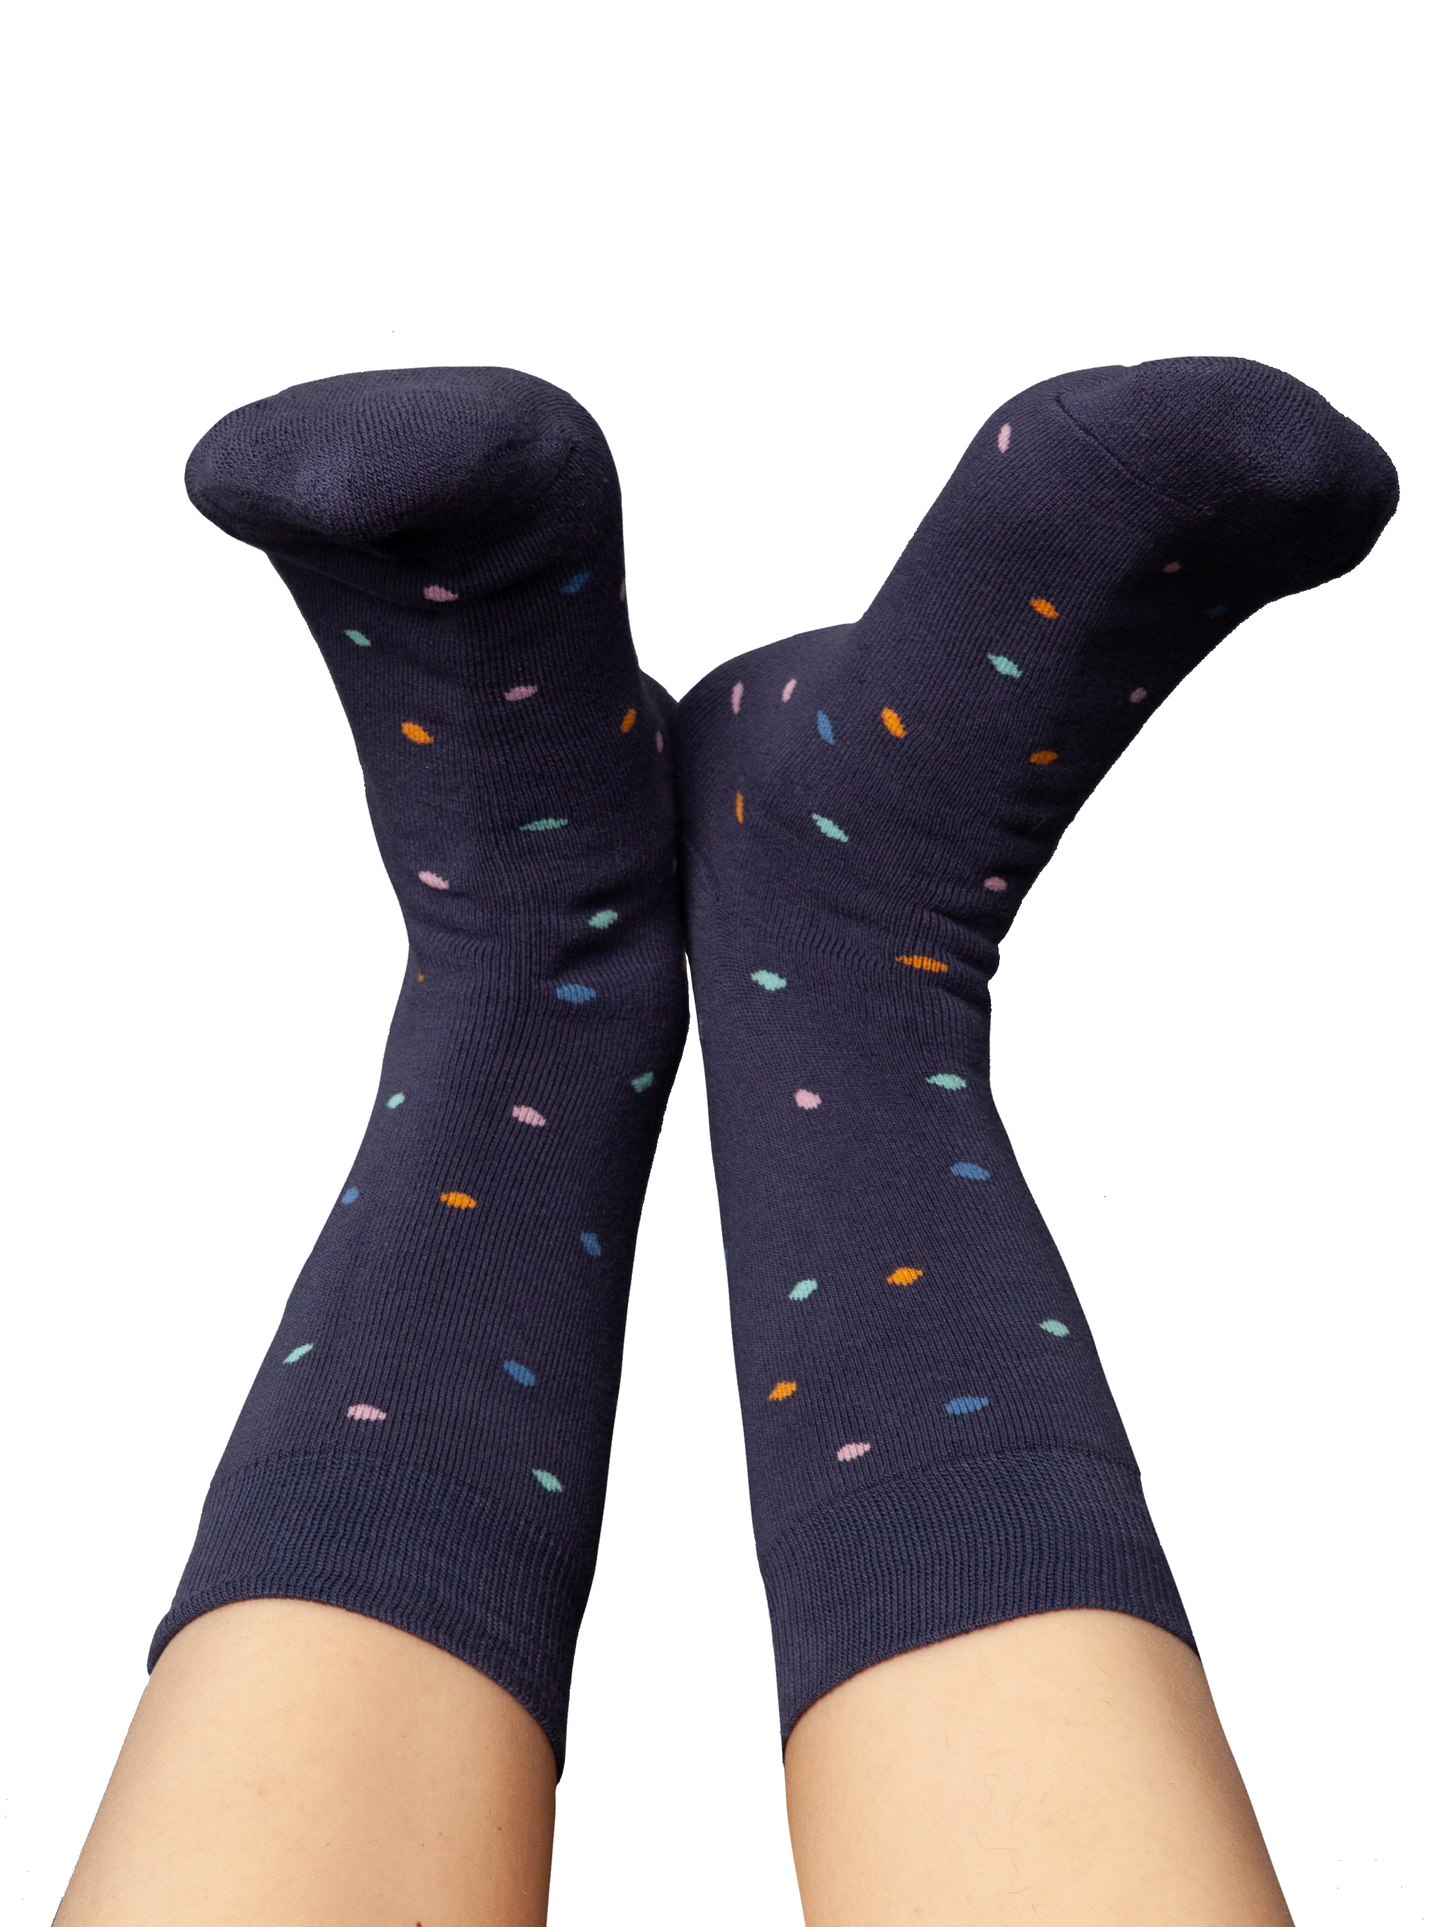 Pack of 3 warm cuddly socks with organic cotton confetti thundercloud